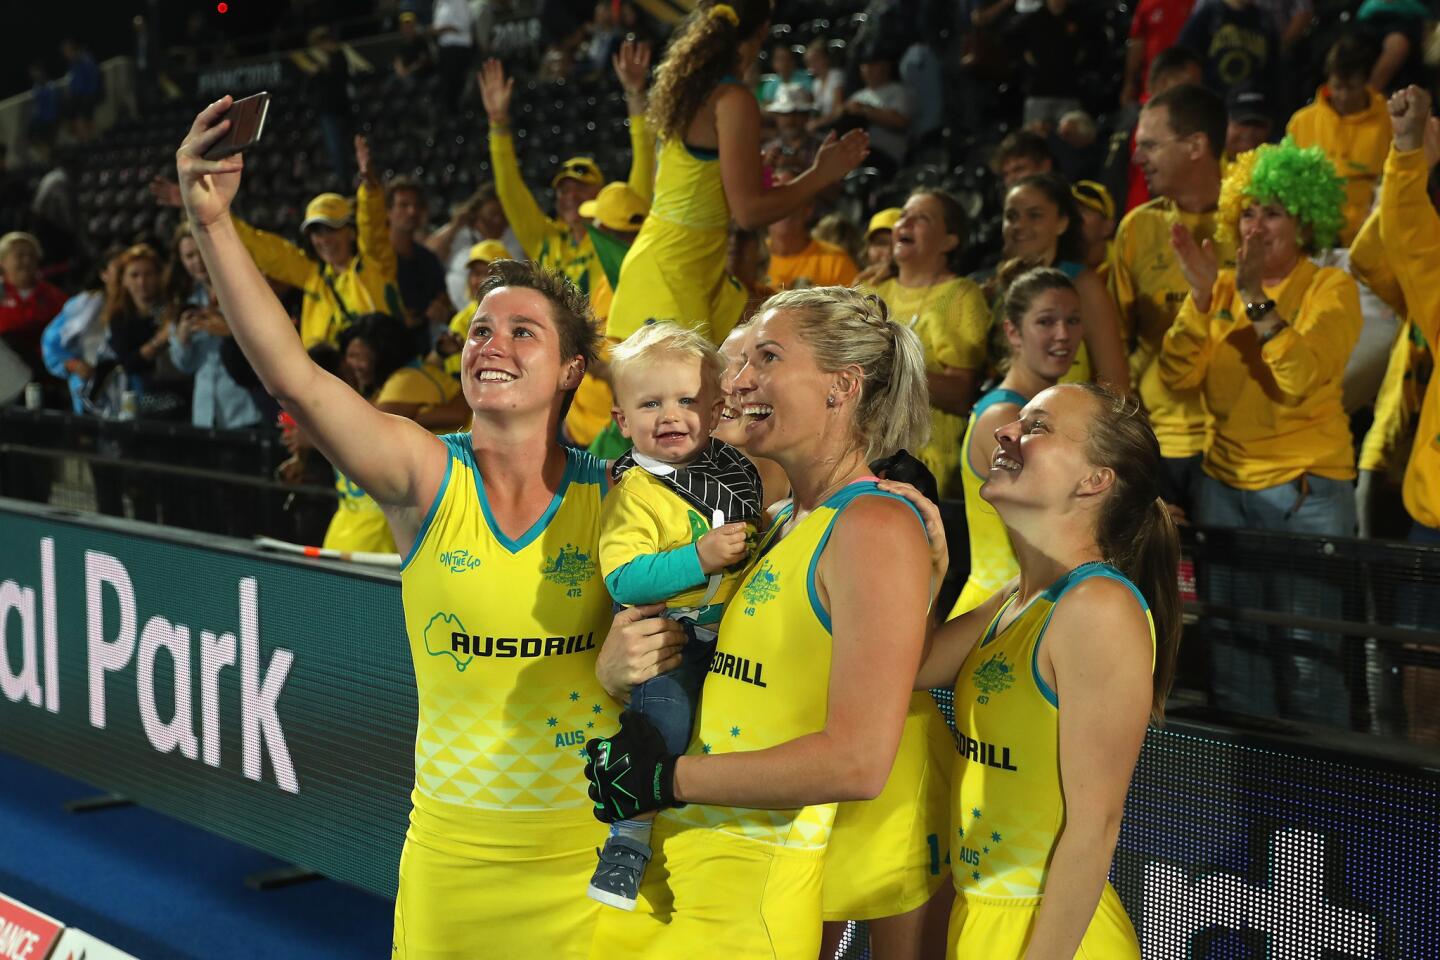 LONDON, ENGLAND - AUGUST 01: Kathryn Slattery of Australia, Jodie Kenny of Australia and Emily Smith of Australia pose for a selfie with family members after their victory during the Quarter Final game between Australia and Argentina of the FIH Womens Hockey World Cup at Lee Valley Hockey and Tennis Centre on August 1, 2018 in London, England. (Photo by Christopher Lee/Getty Images) ** OUTS - ELSENT, FPG, CM - OUTS * NM, PH, VA if sourced by CT, LA or MoD **